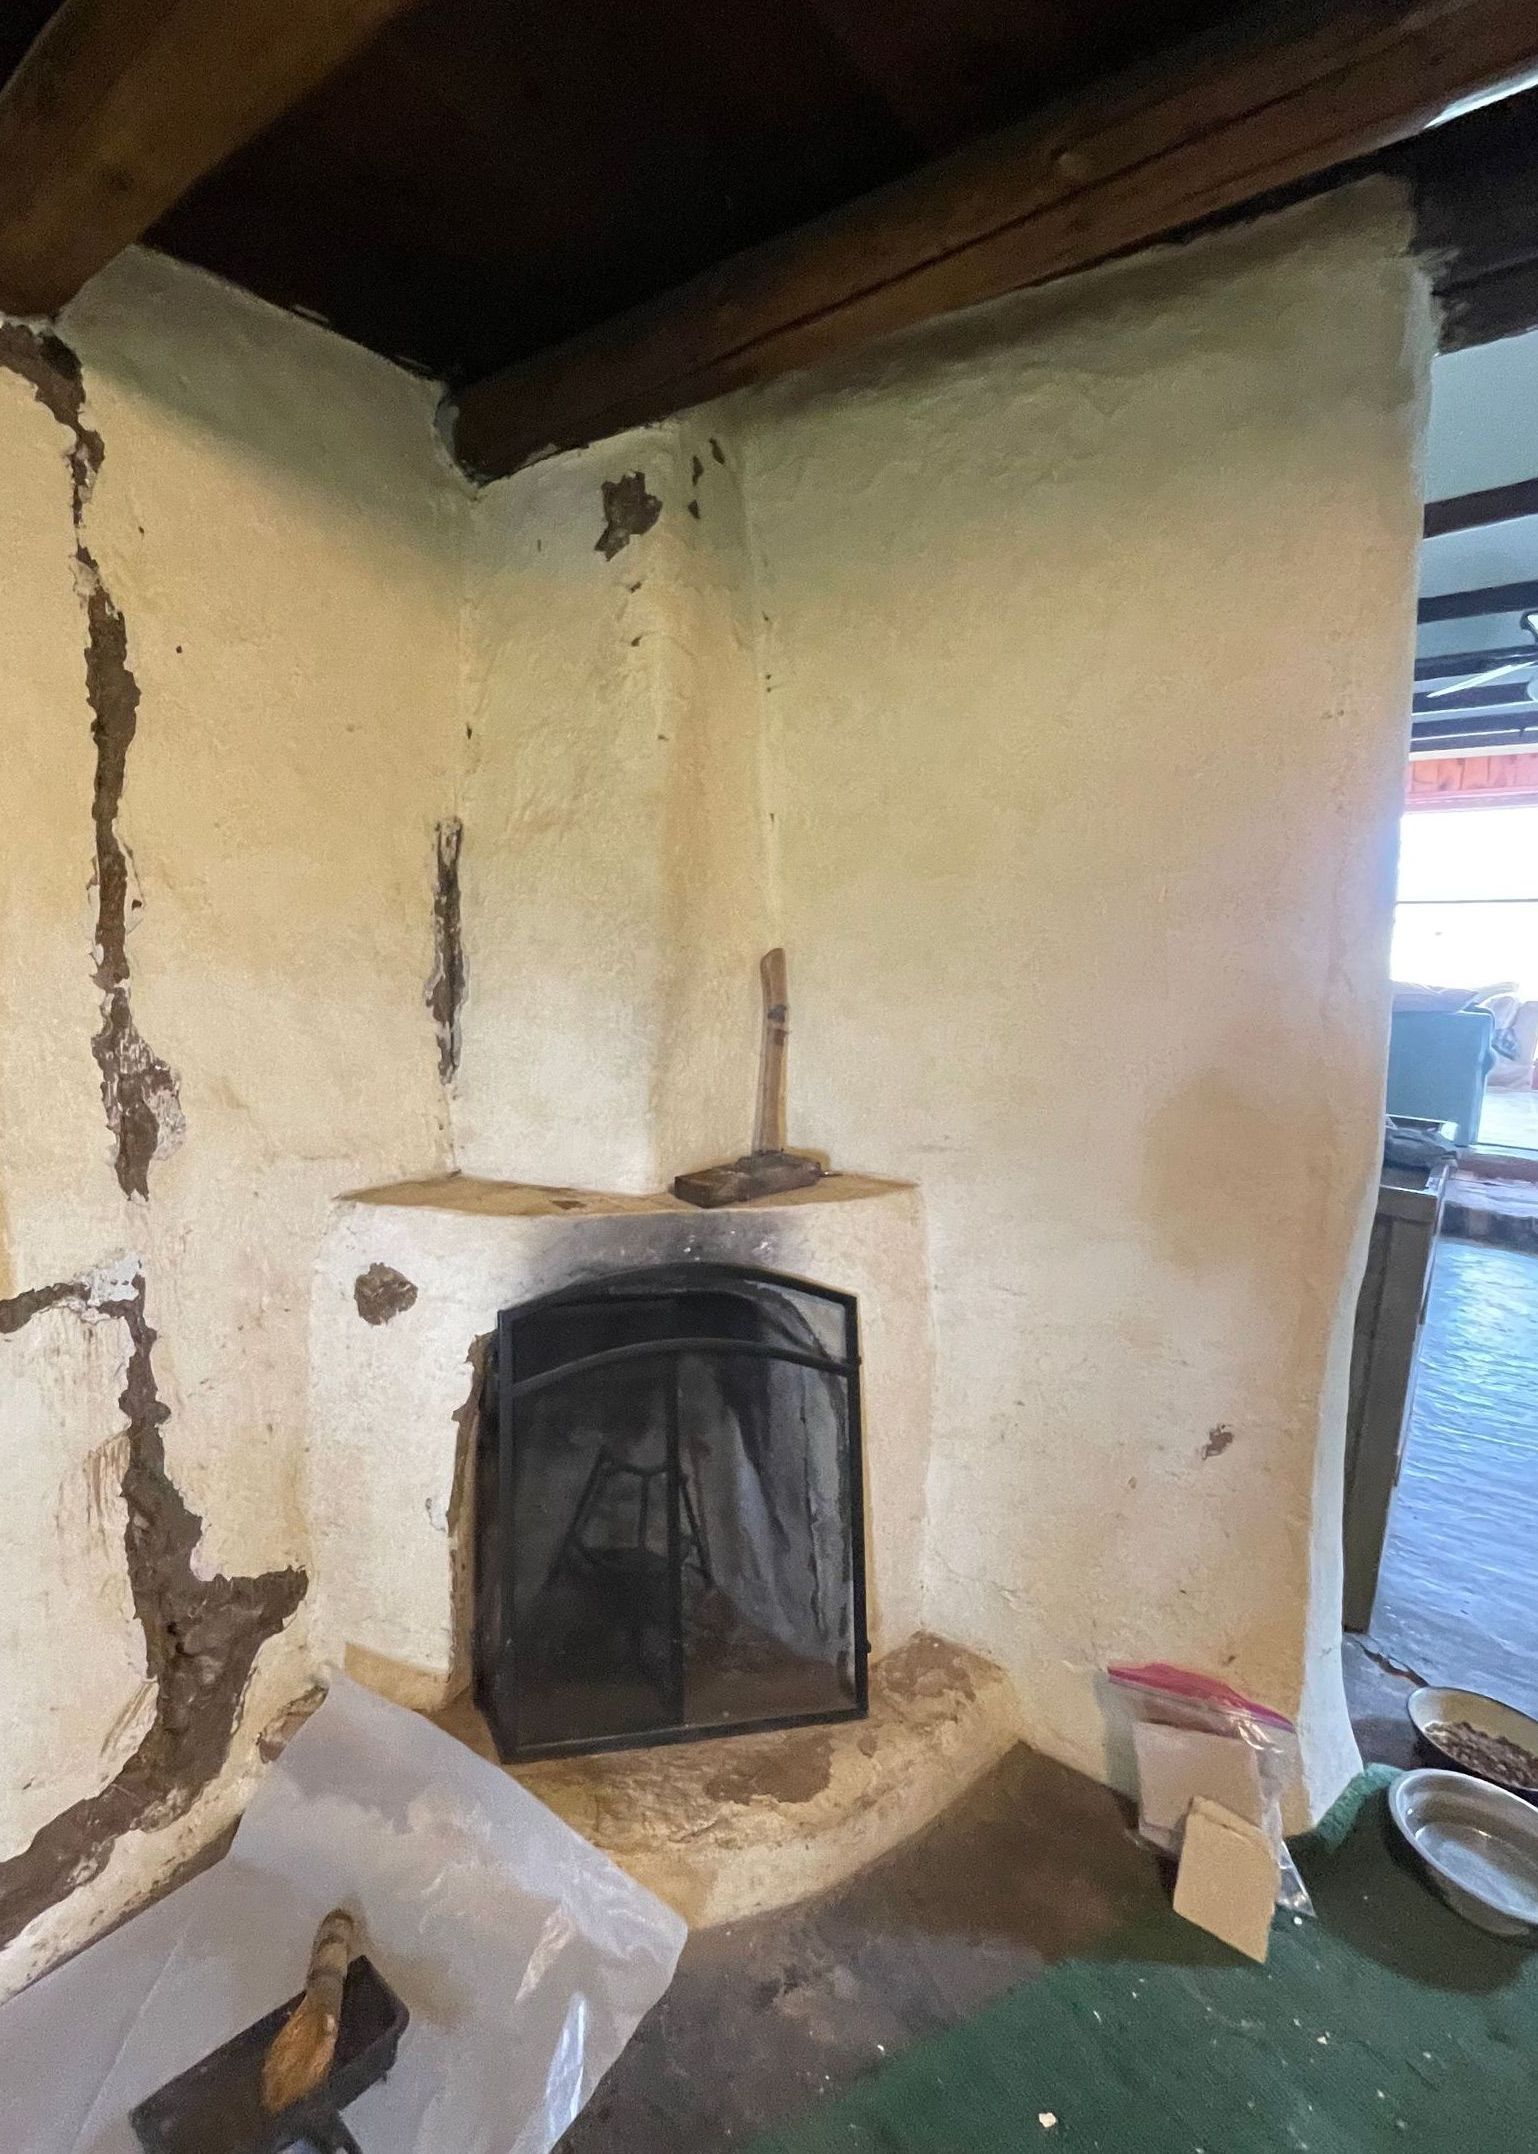 An old adobe fireplace with white plaster peeling off and large holes in the mud